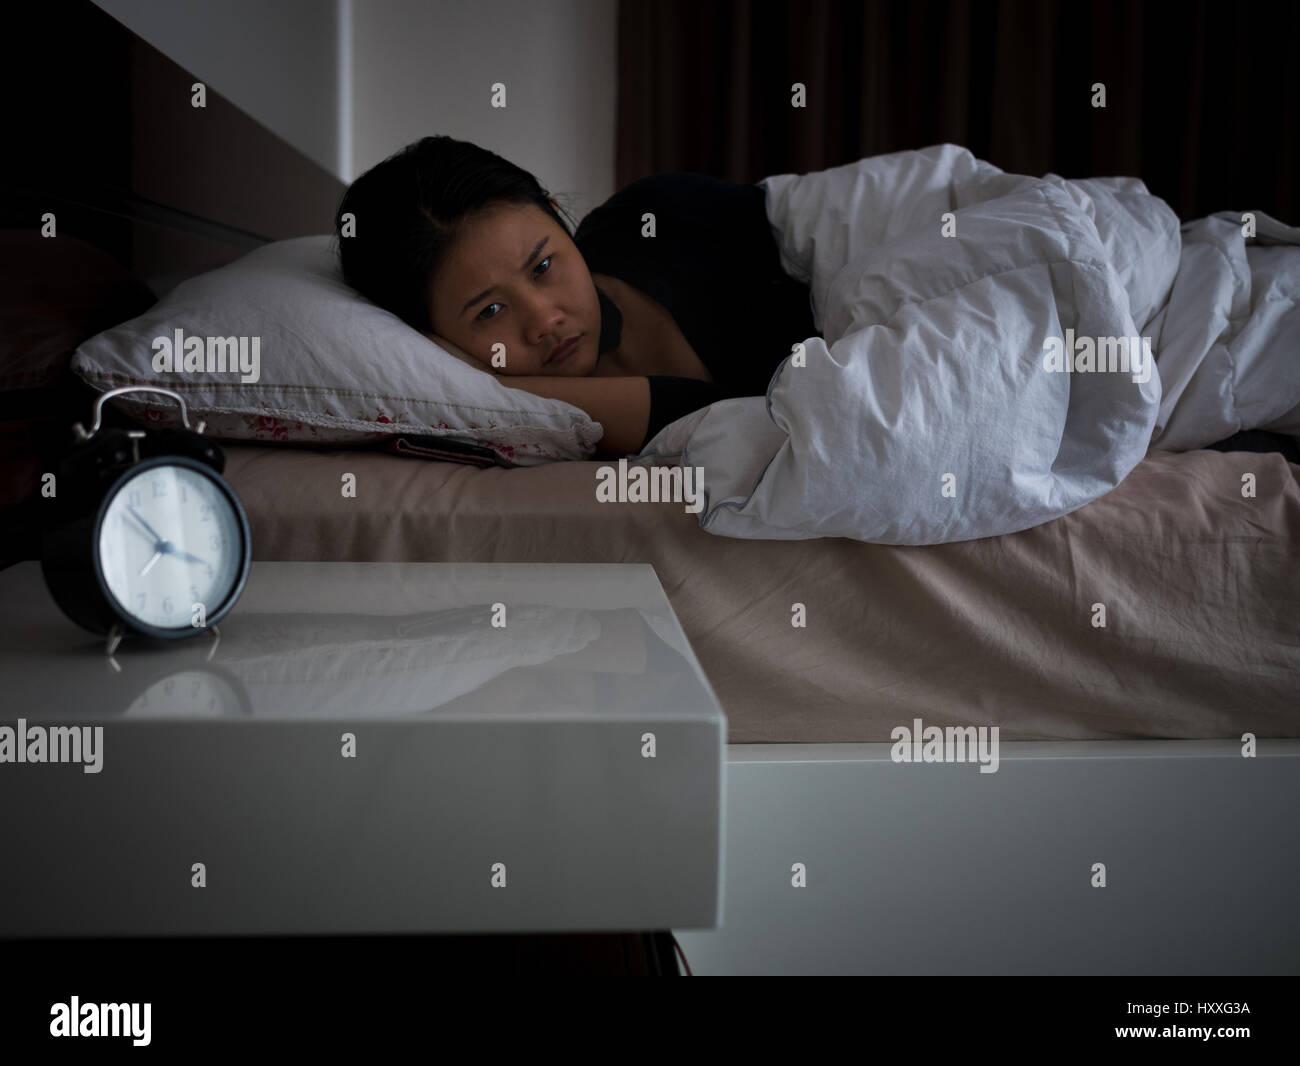 asian woman lying on bed awaking, insomnia concept Stock Photo